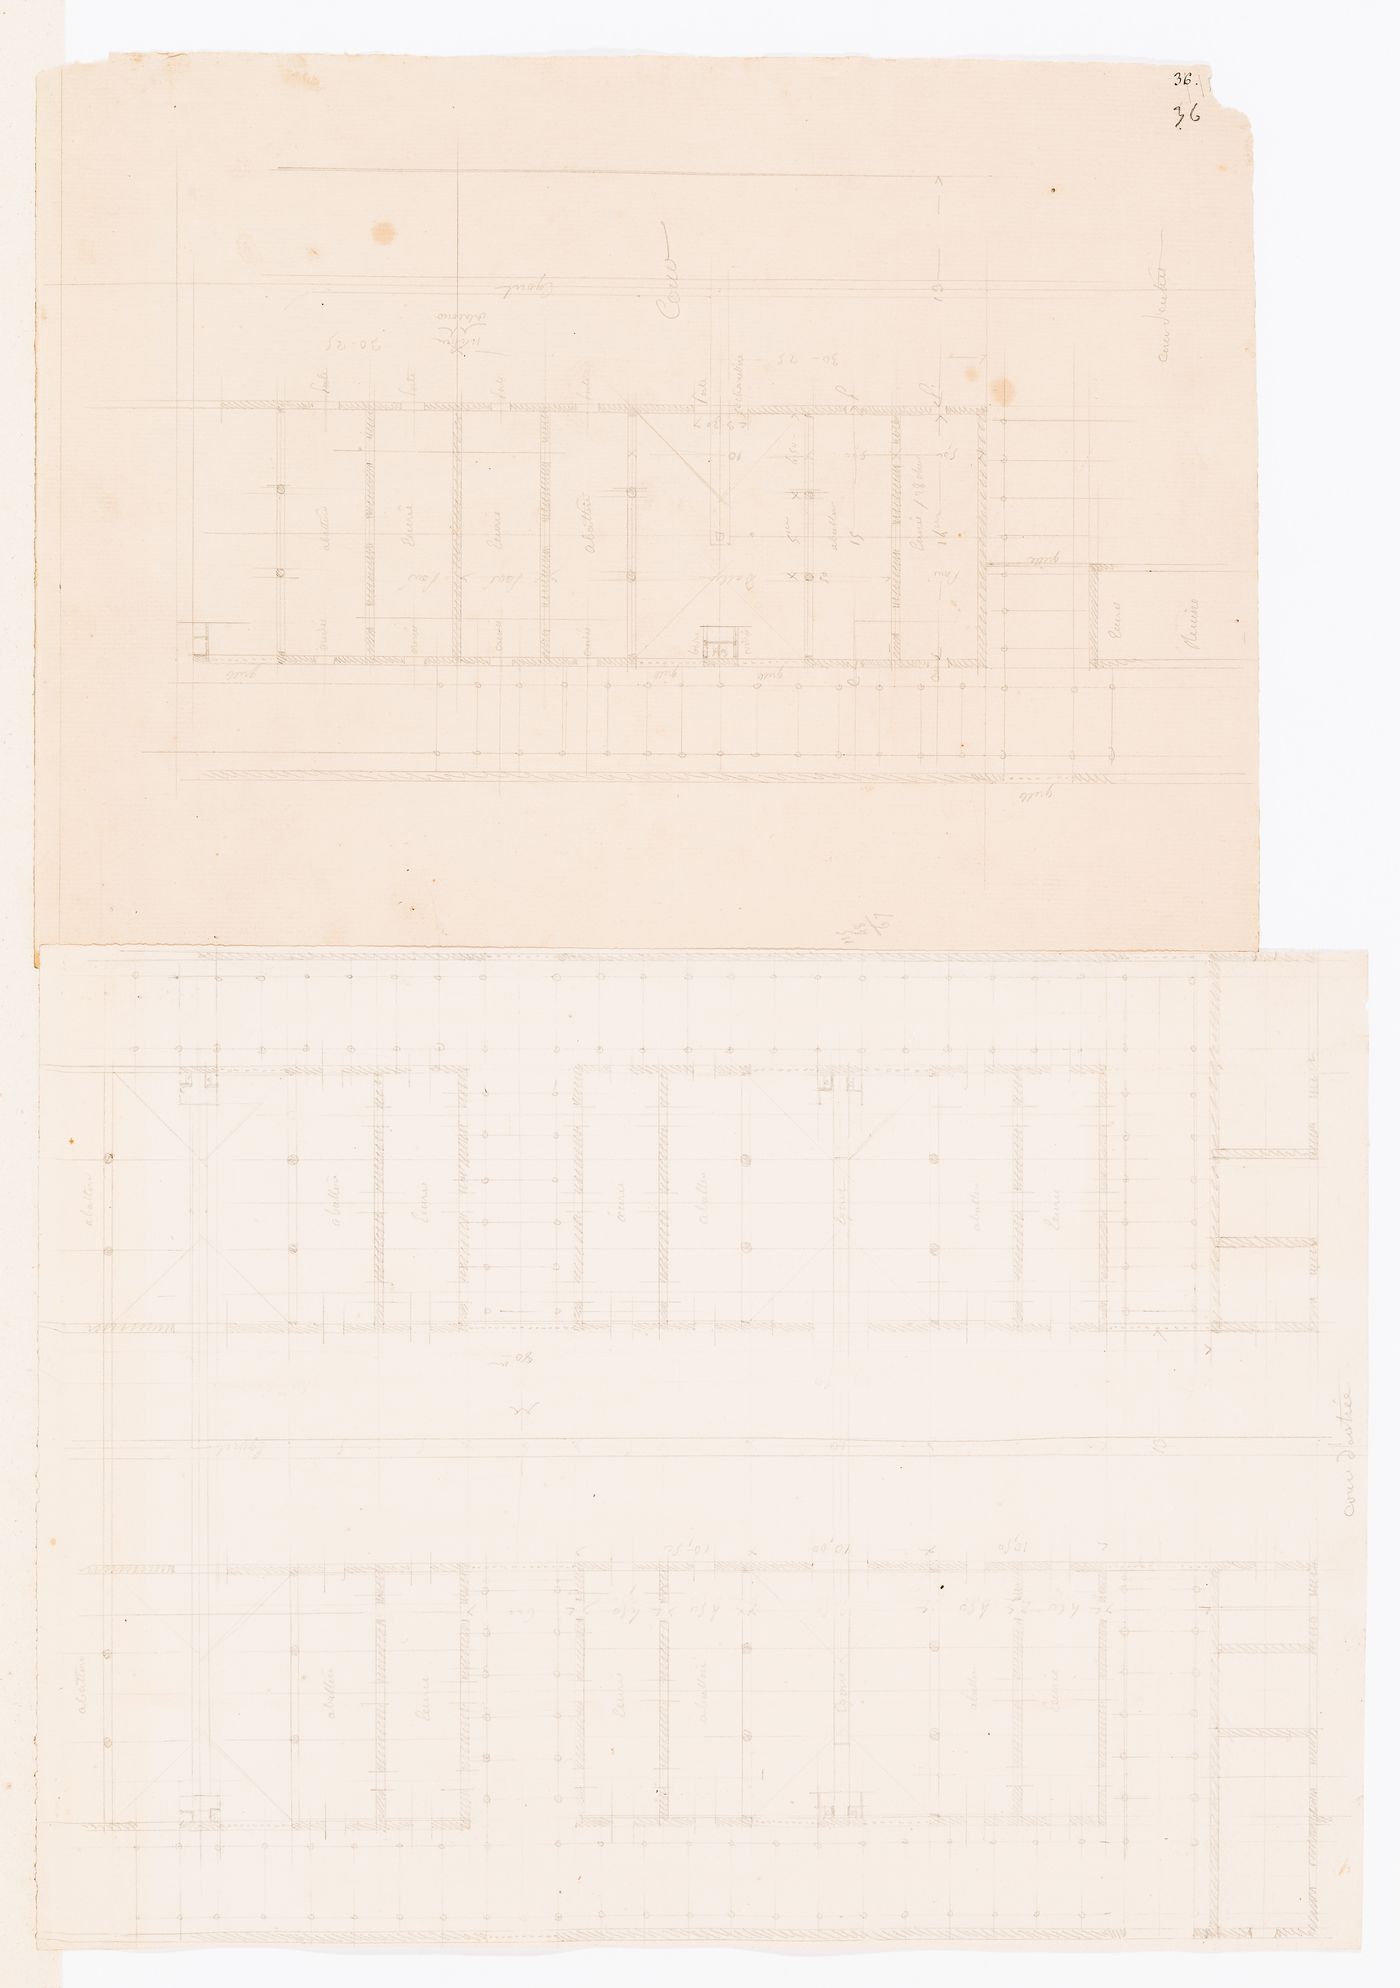 Project for a horse slaughterhouse, Plaine de Grenelle: Plan for a combined stable and slaughterhouse